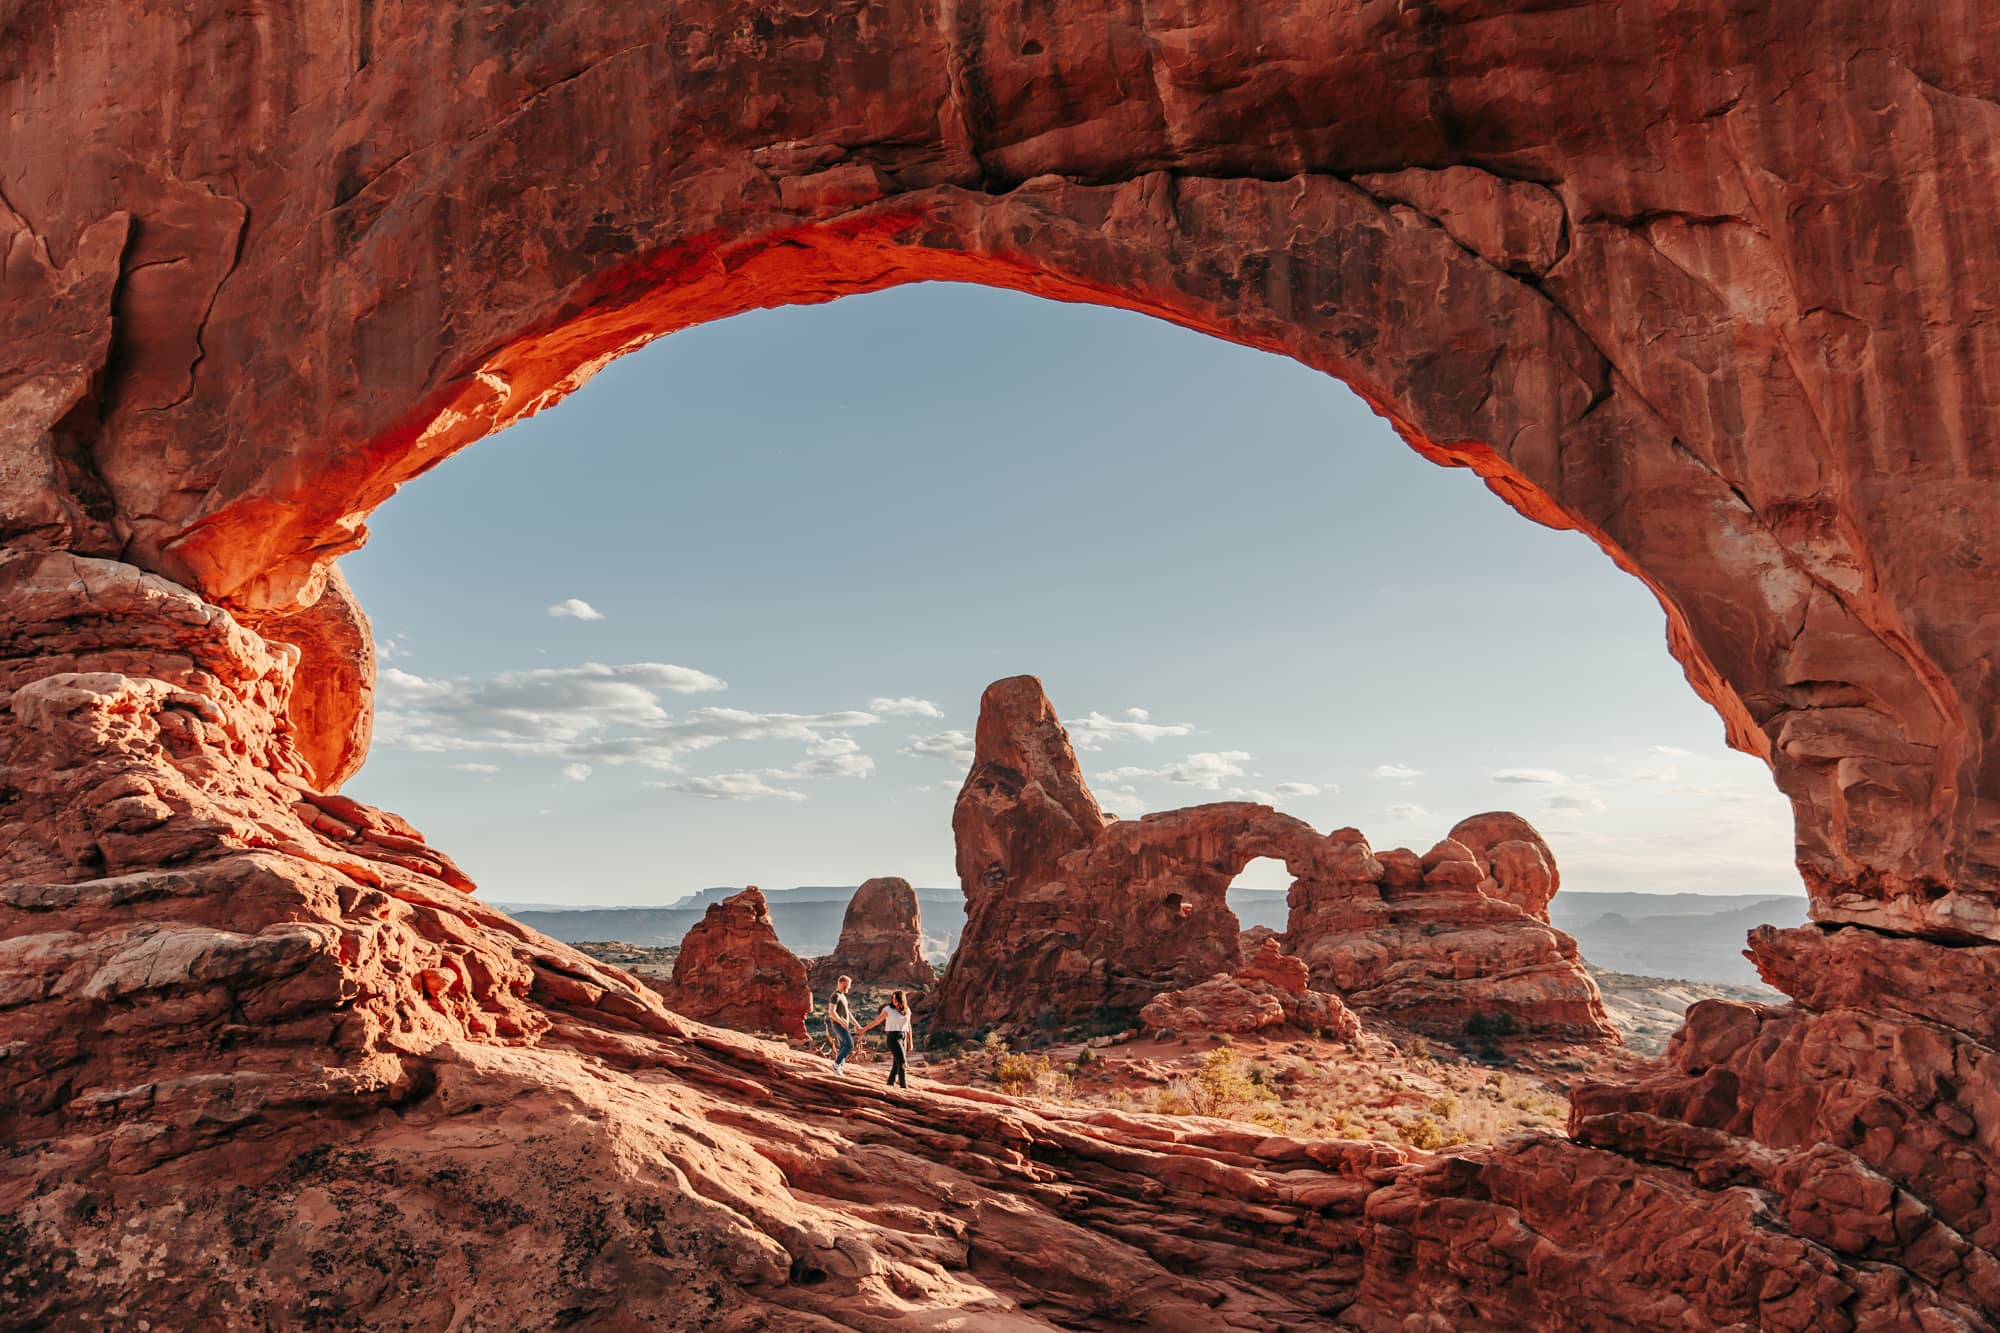 Couple walking under a large arch in arches national park